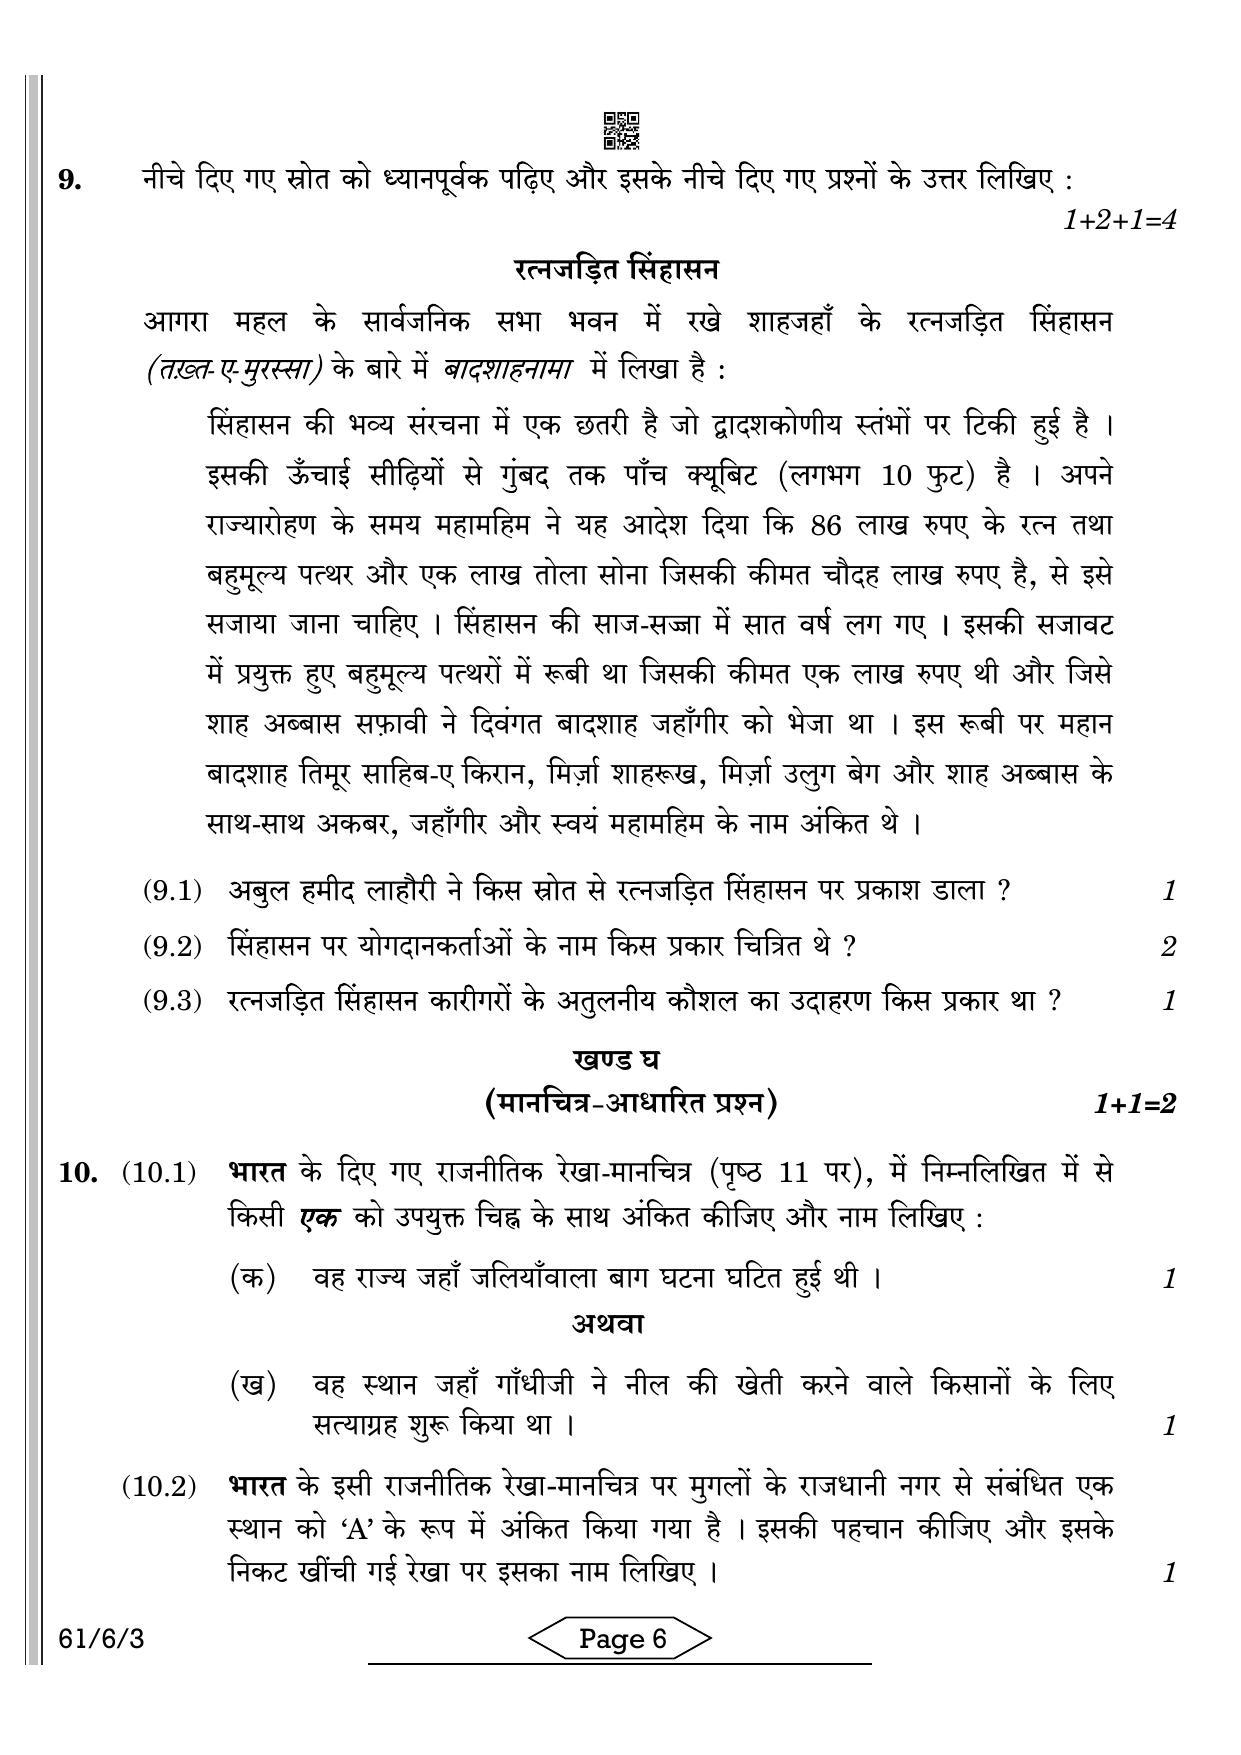 CBSE Class 12 61-6-3 HISTORY 2022 Compartment Question Paper - Page 6